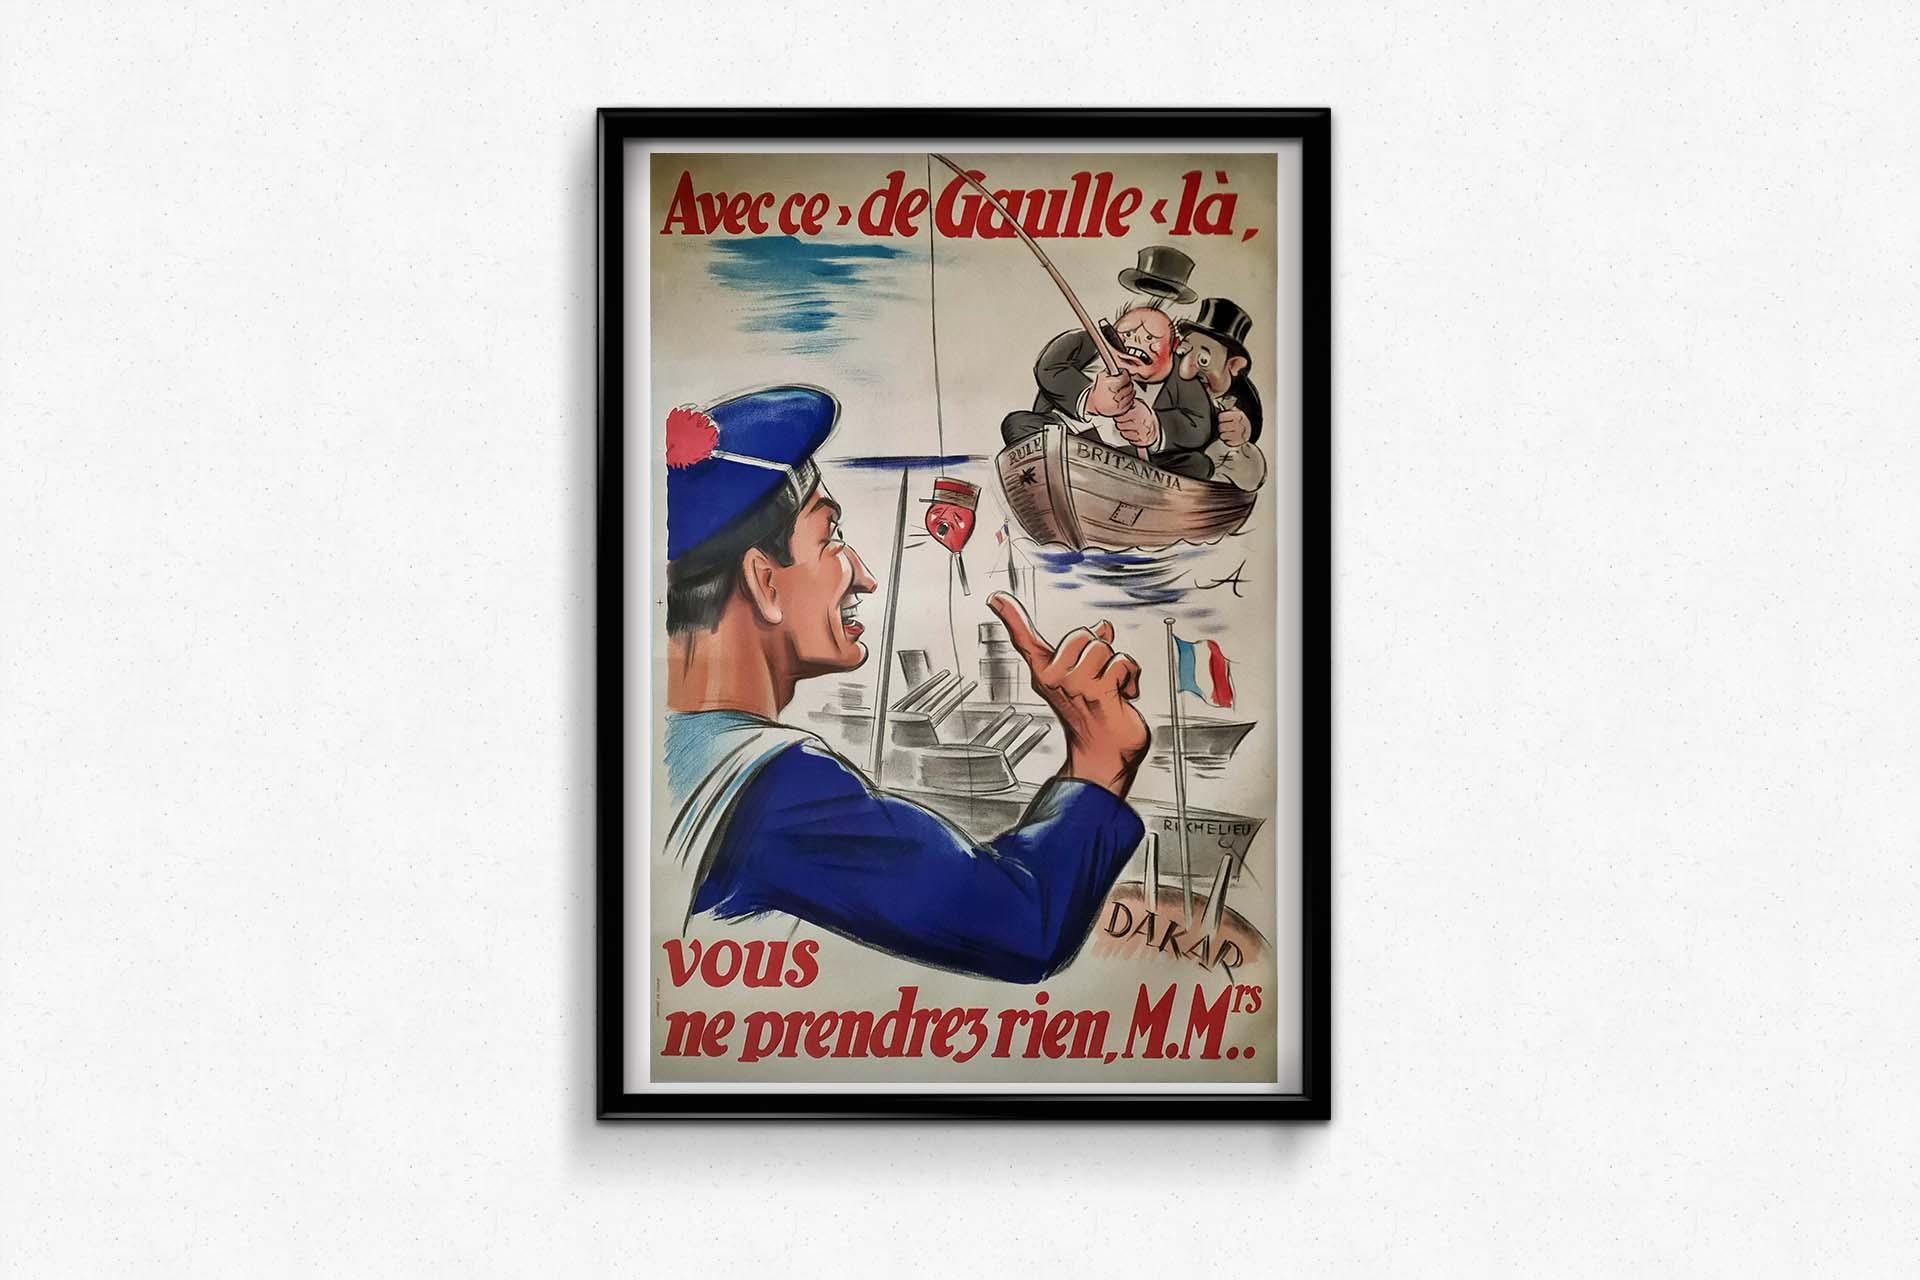 In the world of political propaganda and caricature, the 1940 original poster bearing the phrase 